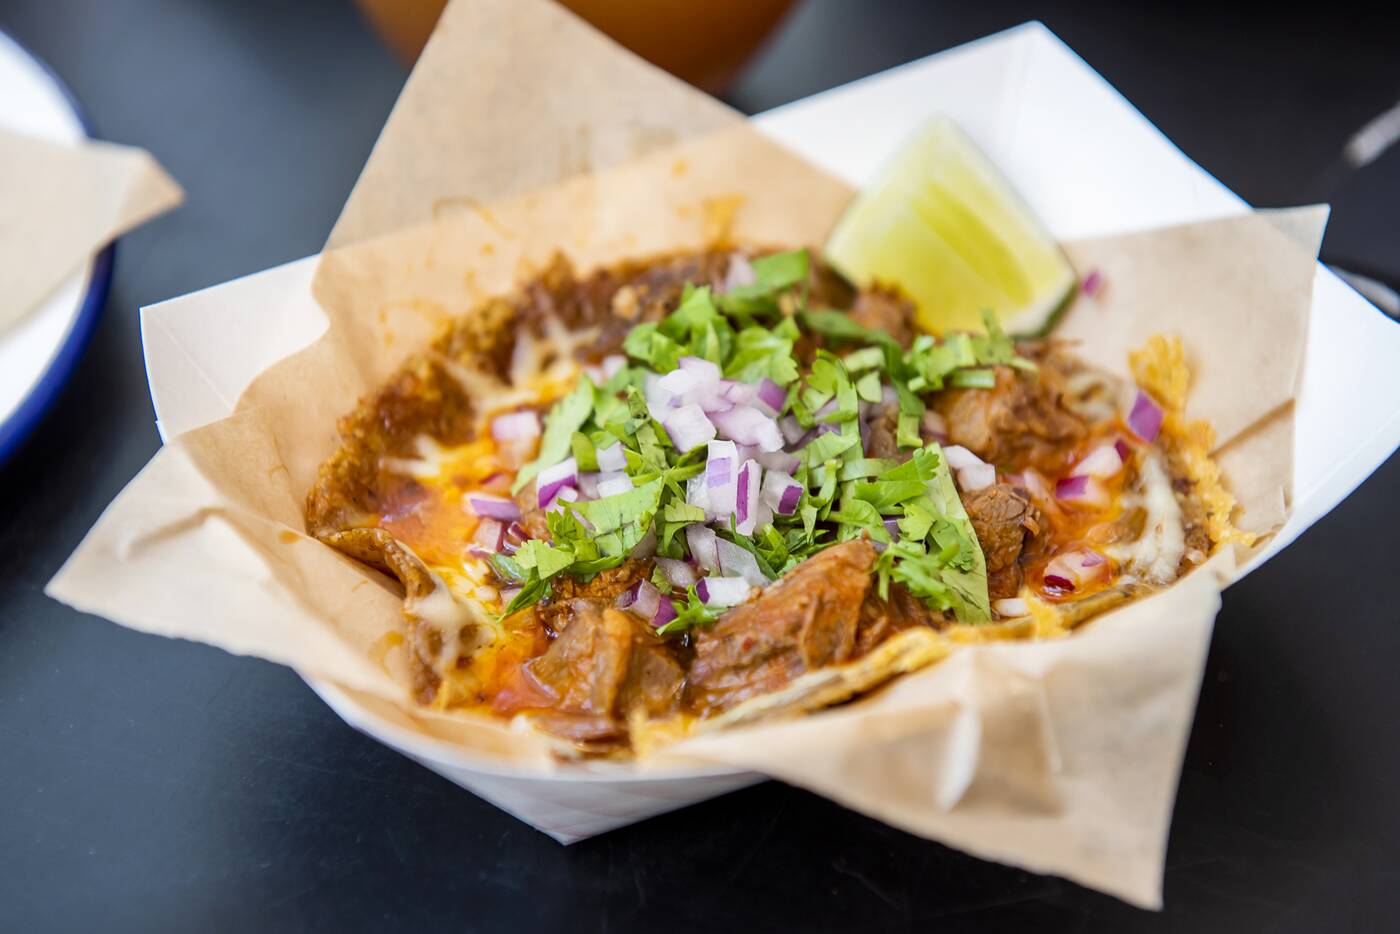 Why birria tacos are becoming Toronto's latest budding food trend